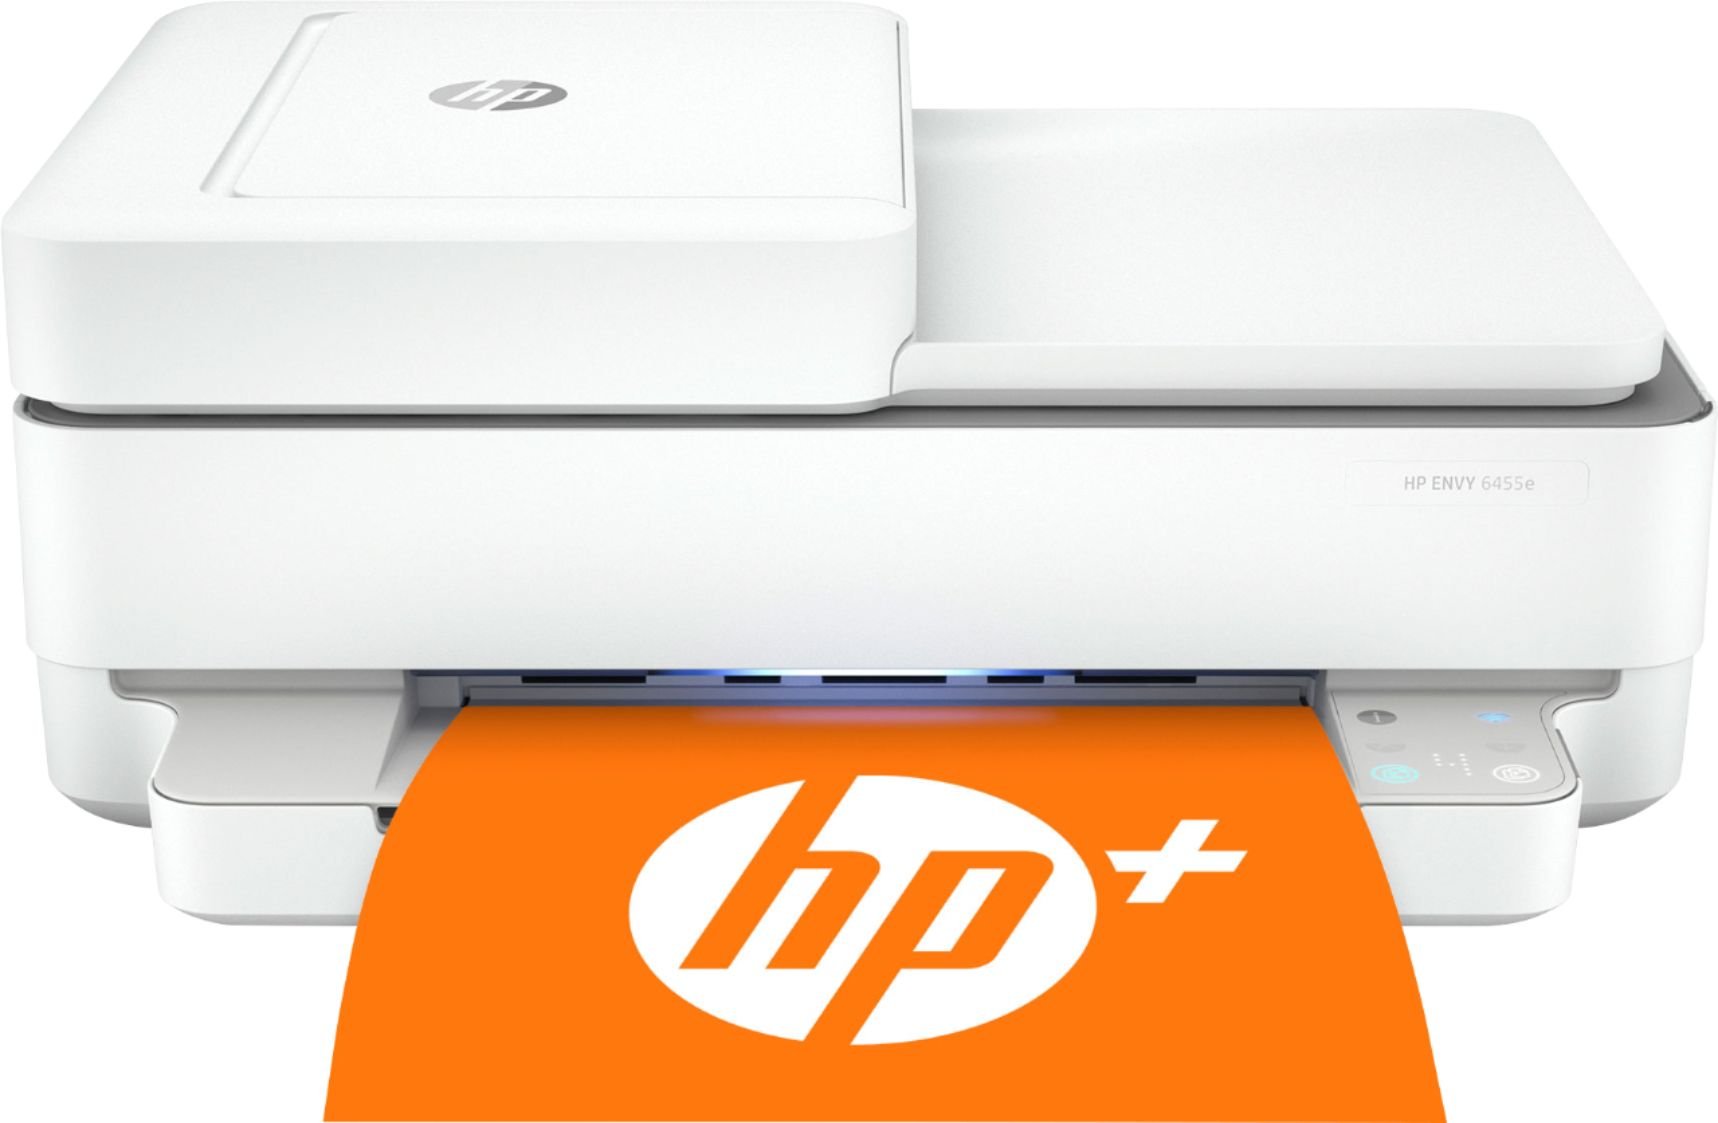 Hp Envy 6455e All In One Printer With 6 Months Free Ink Through Hp Plus Rc Willey 0653